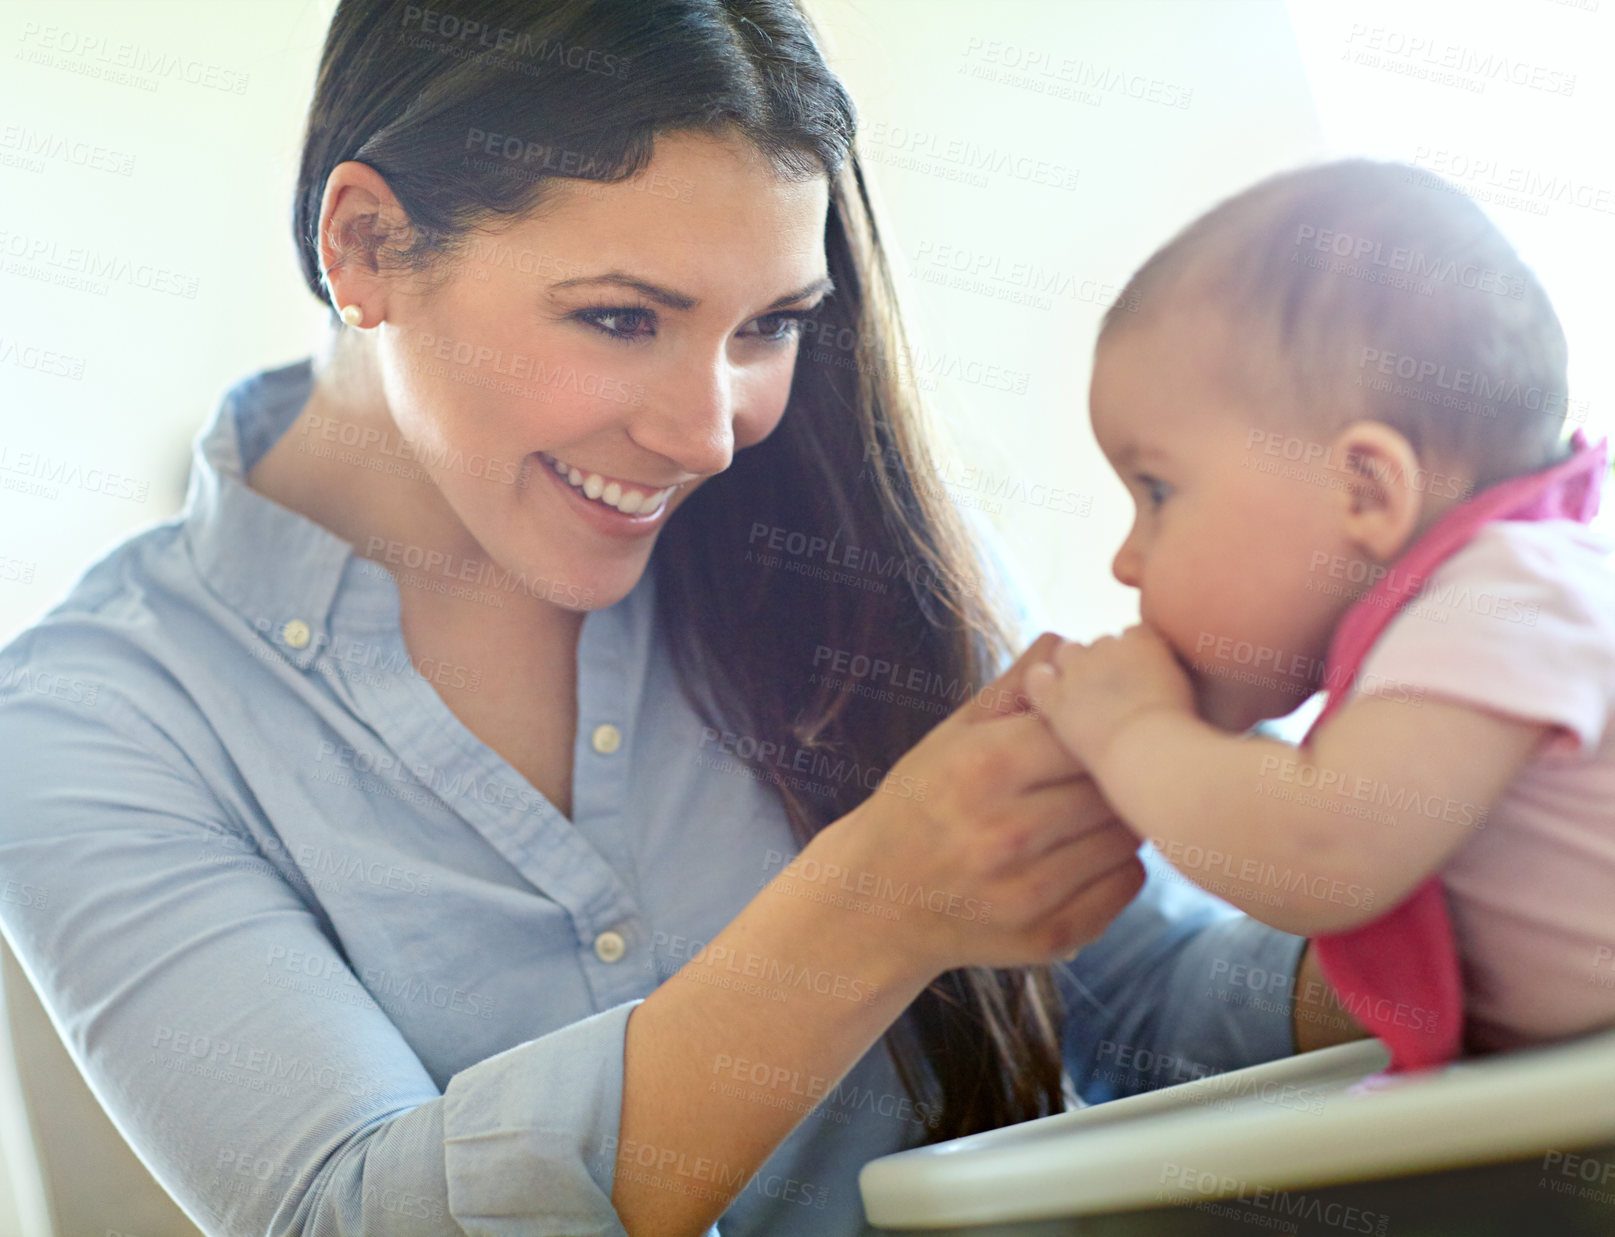 Buy stock photo Shot of a mother feeding her baby girl in a high chair